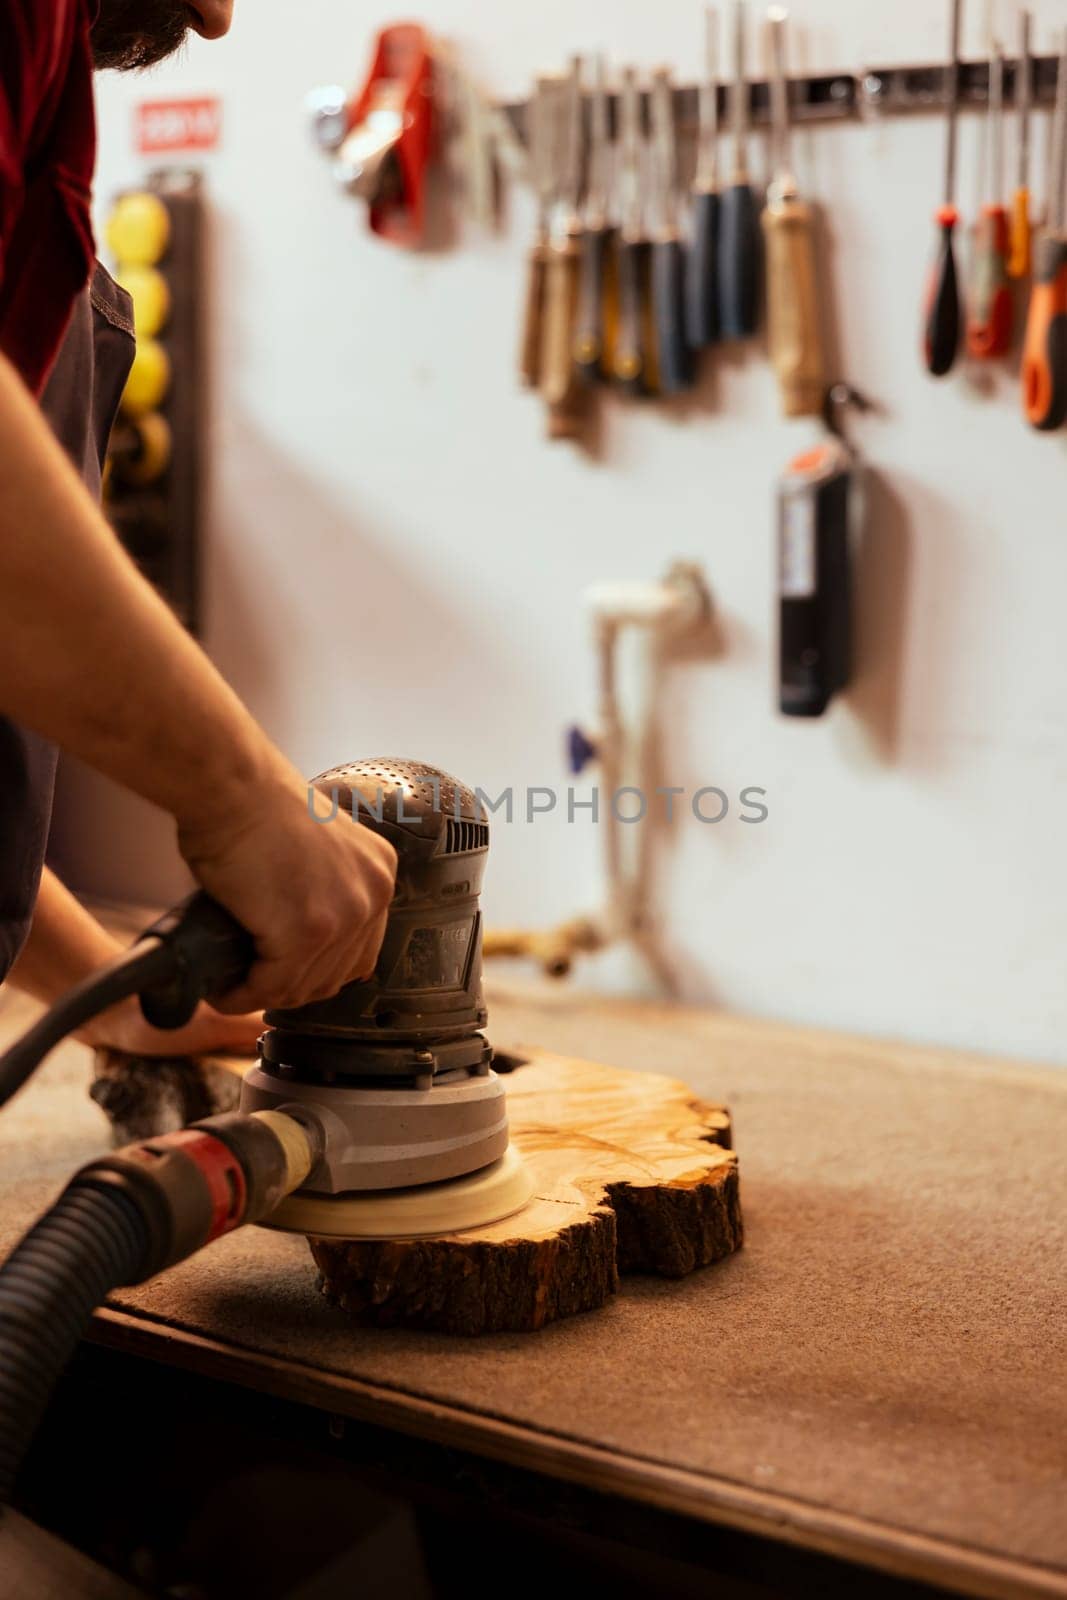 Woodworking specialist in assembly shop uses angle grinder on wood by DCStudio